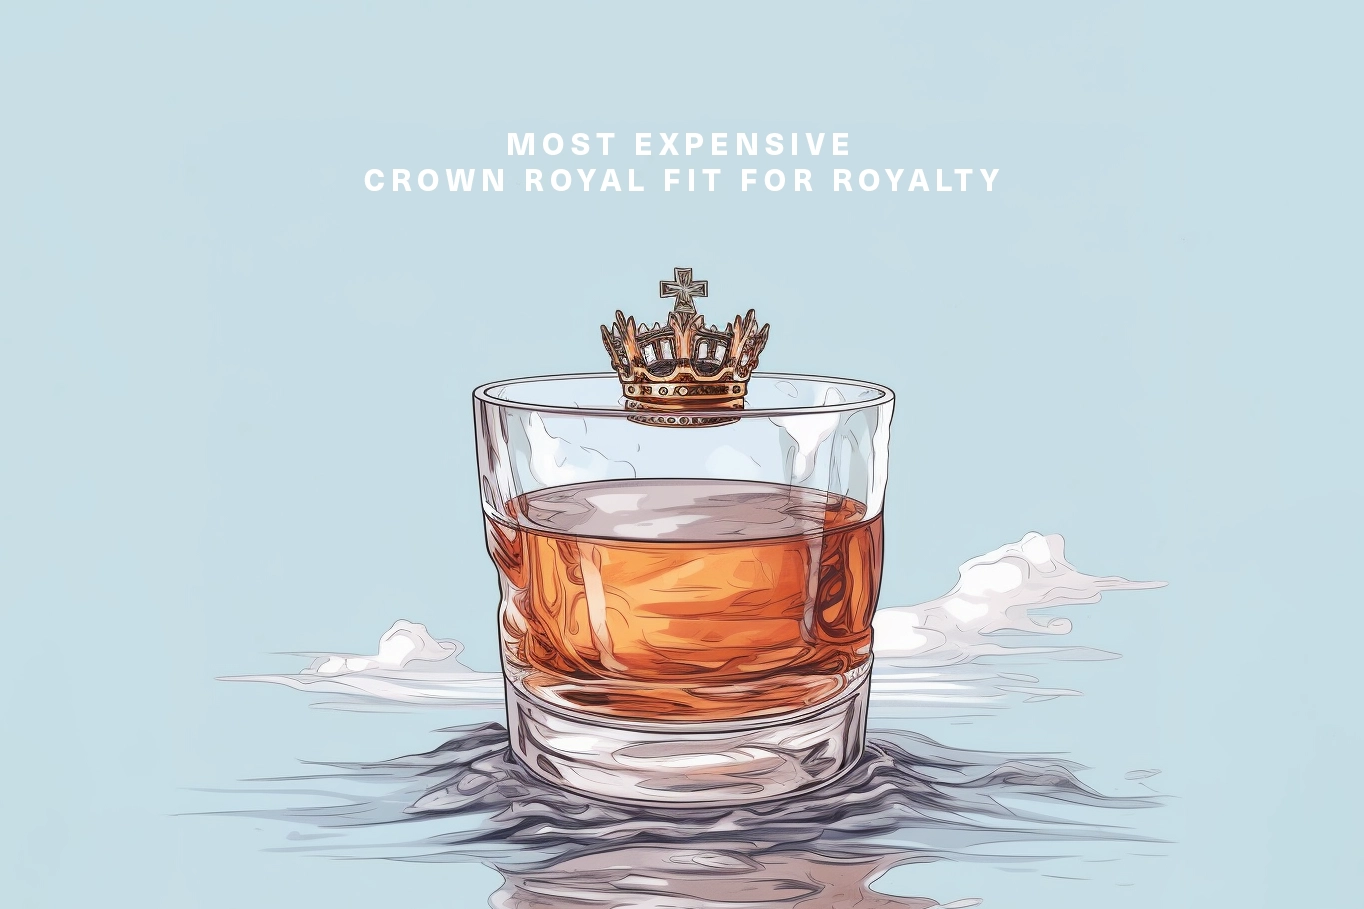 Most Expensive Crown Royal Fit for Royalty